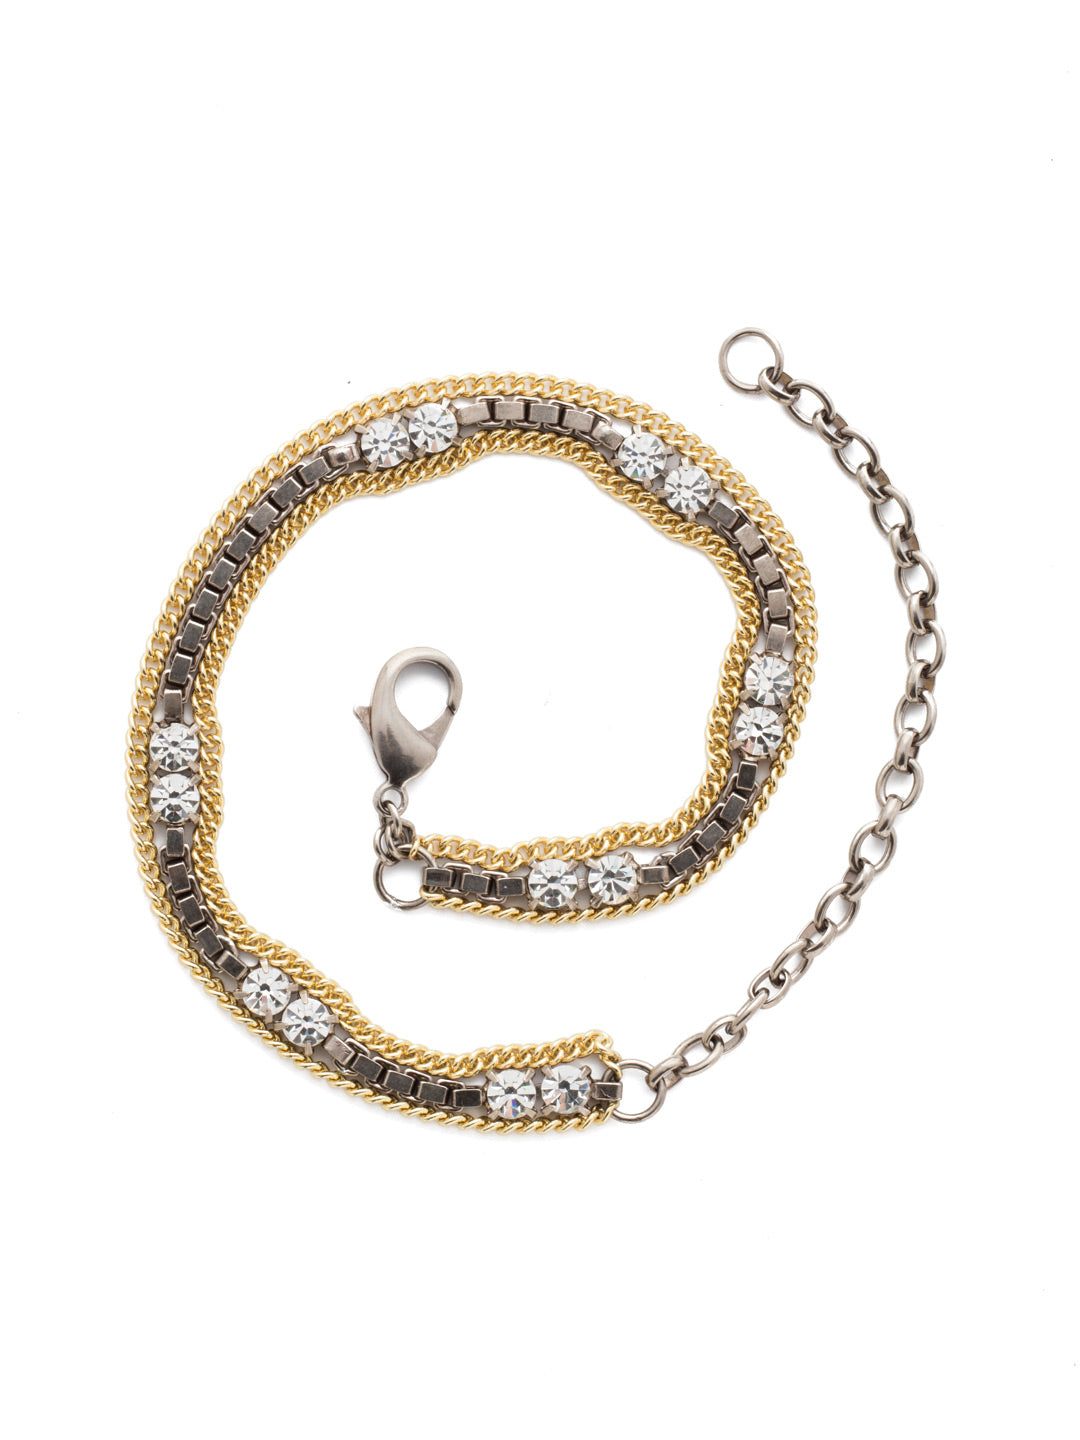 Natalia Layered Bracelet - BEB29MXCRY - <p>This unique style consisting of mixed metal chains gets a touch of sparkle from paired crystal embellishments. Worn wrapped around your wrist, this single bracelet delivers a layered look in one step. From Sorrelli's Crystal collection in our Mixed Metal finish.</p>